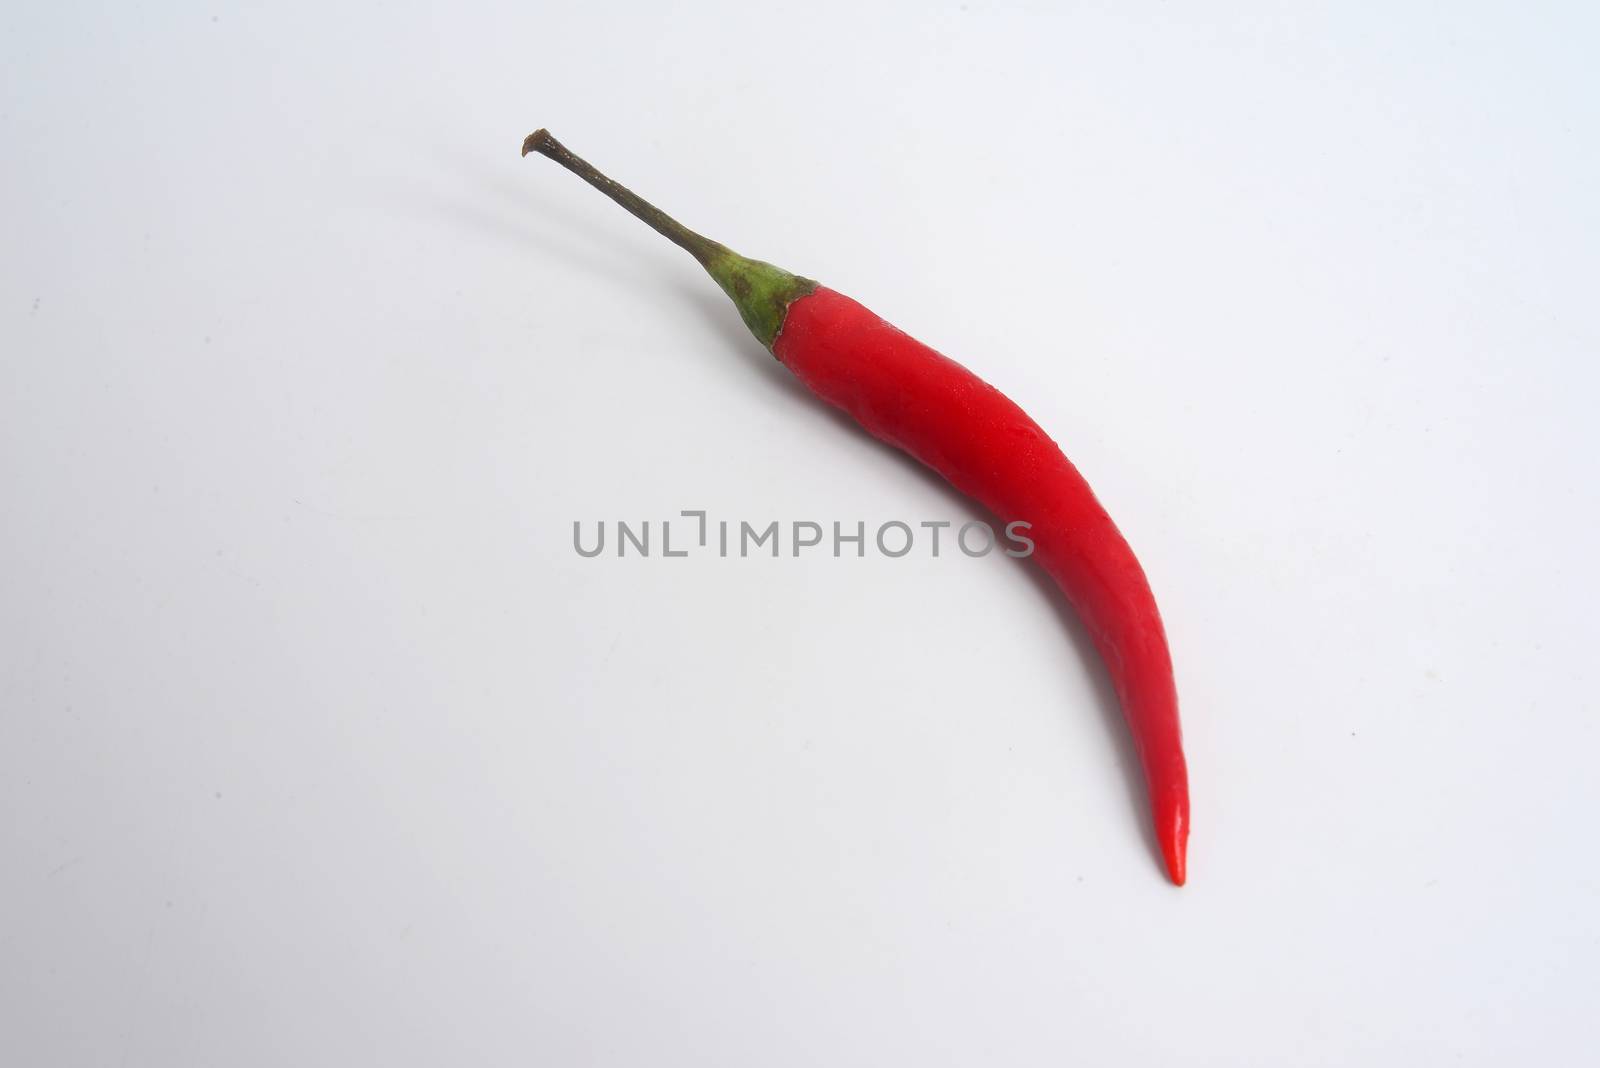 Red chili on white background with copy space for text

